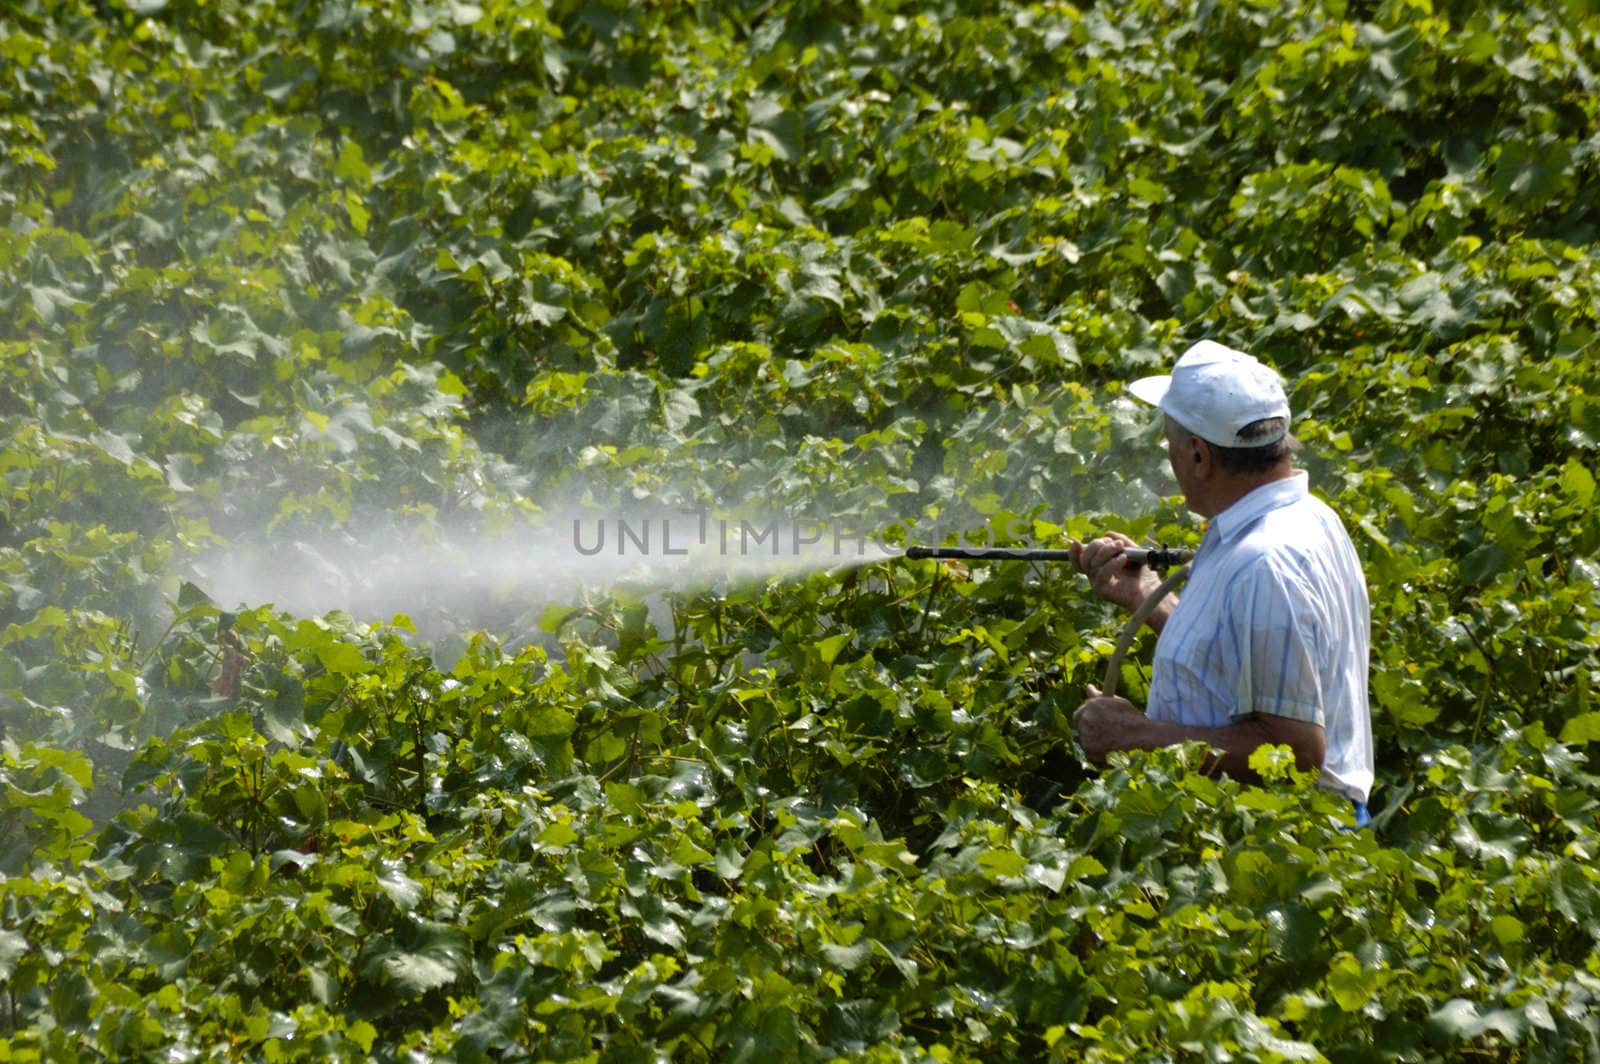 A farmer sprays his vines. He is wearing no protective equipment.